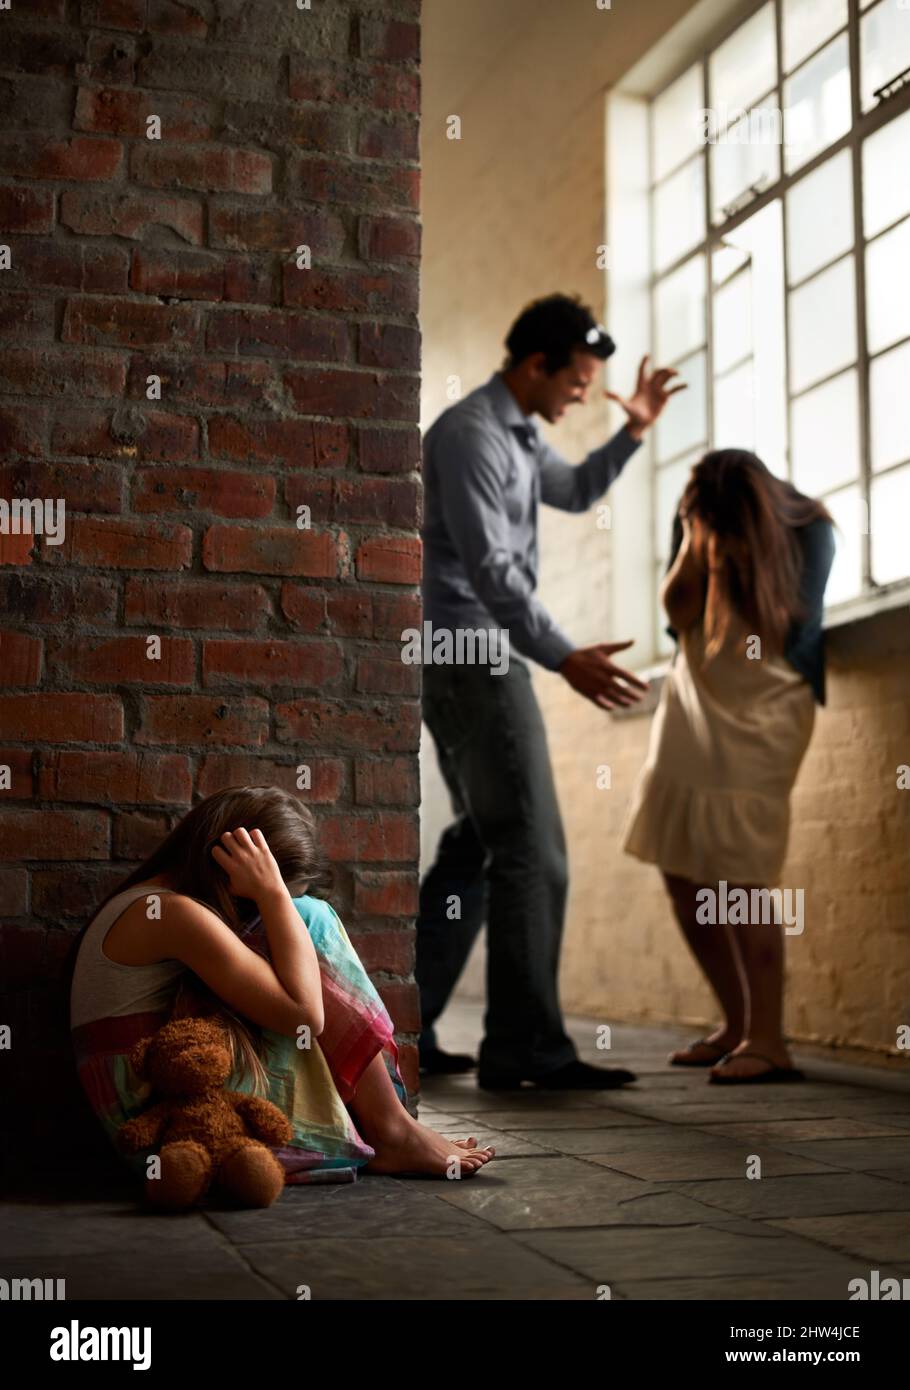 History of abuse. Little girl huddled over while her father abuses her mother nearby. Stock Photo